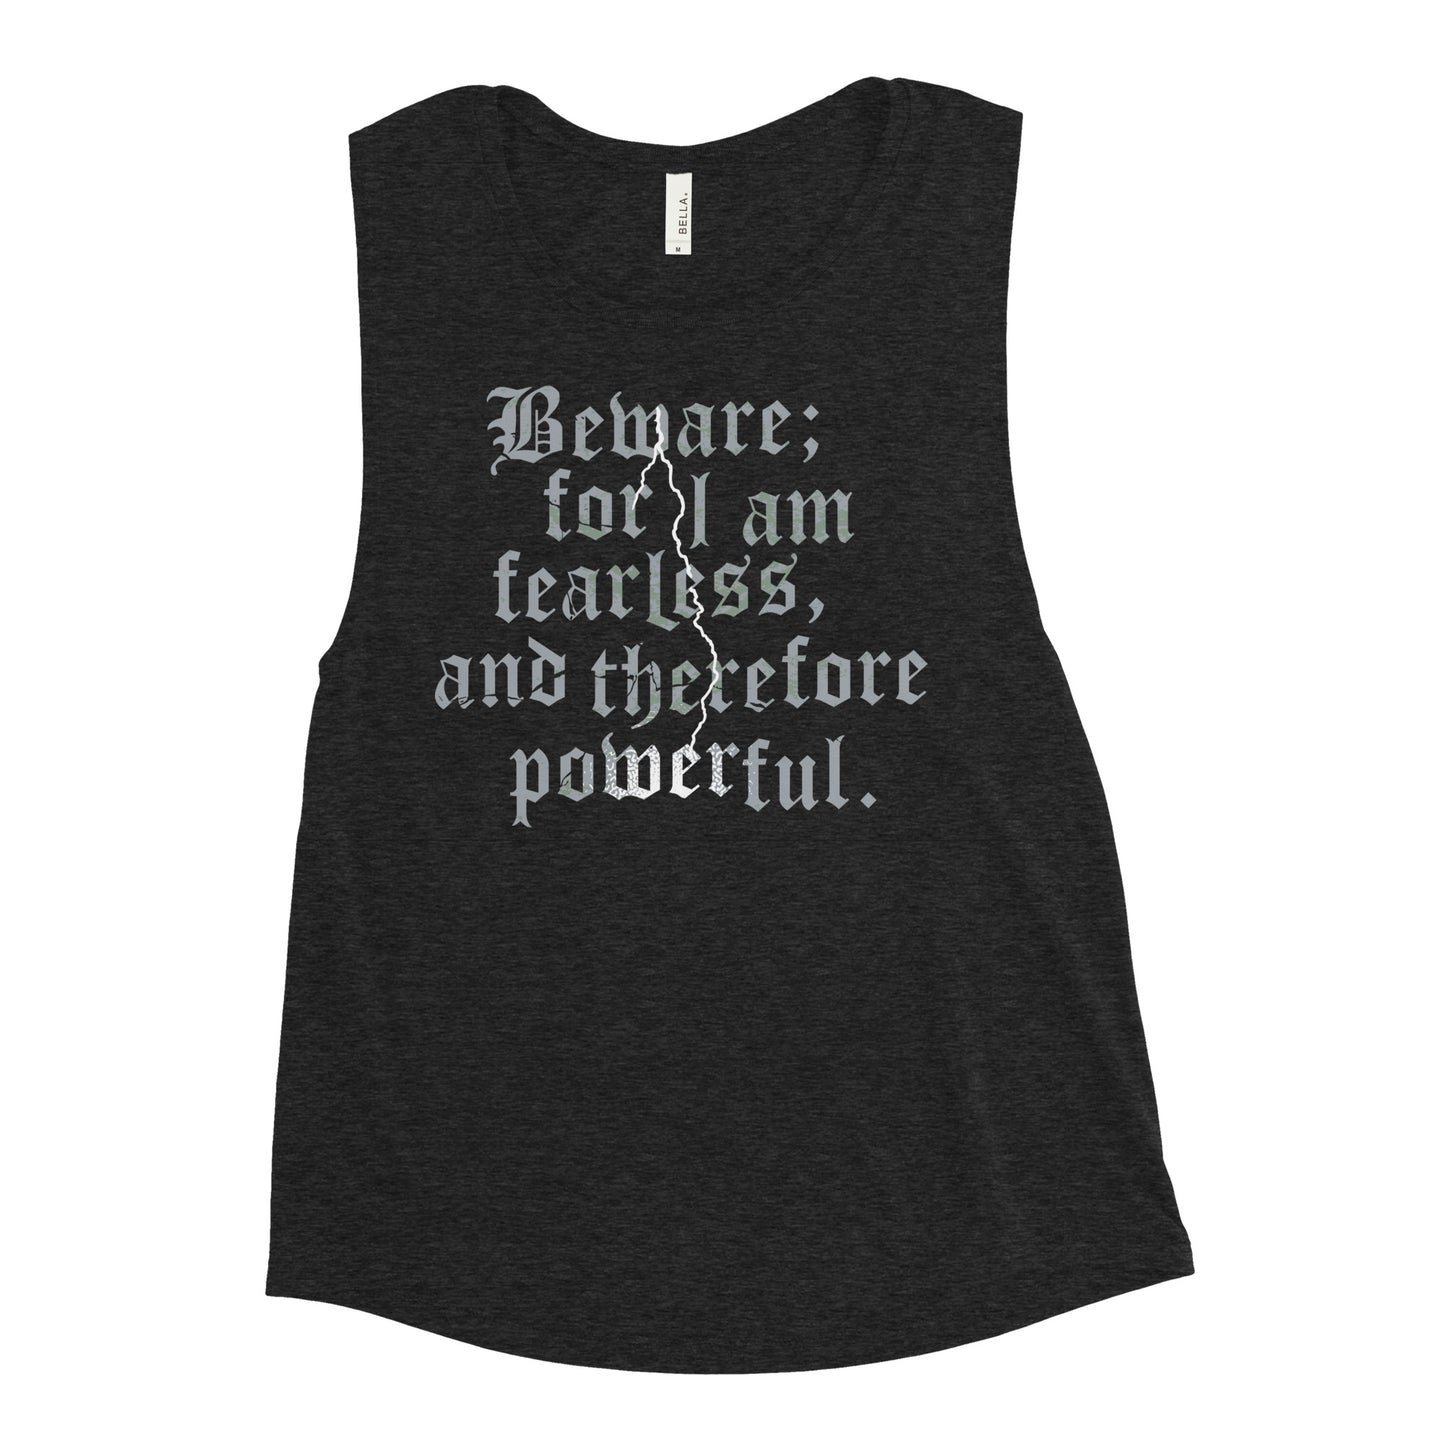 Beware; For I Am Fearless, And Therefore Powerful Women's Muscle Tank